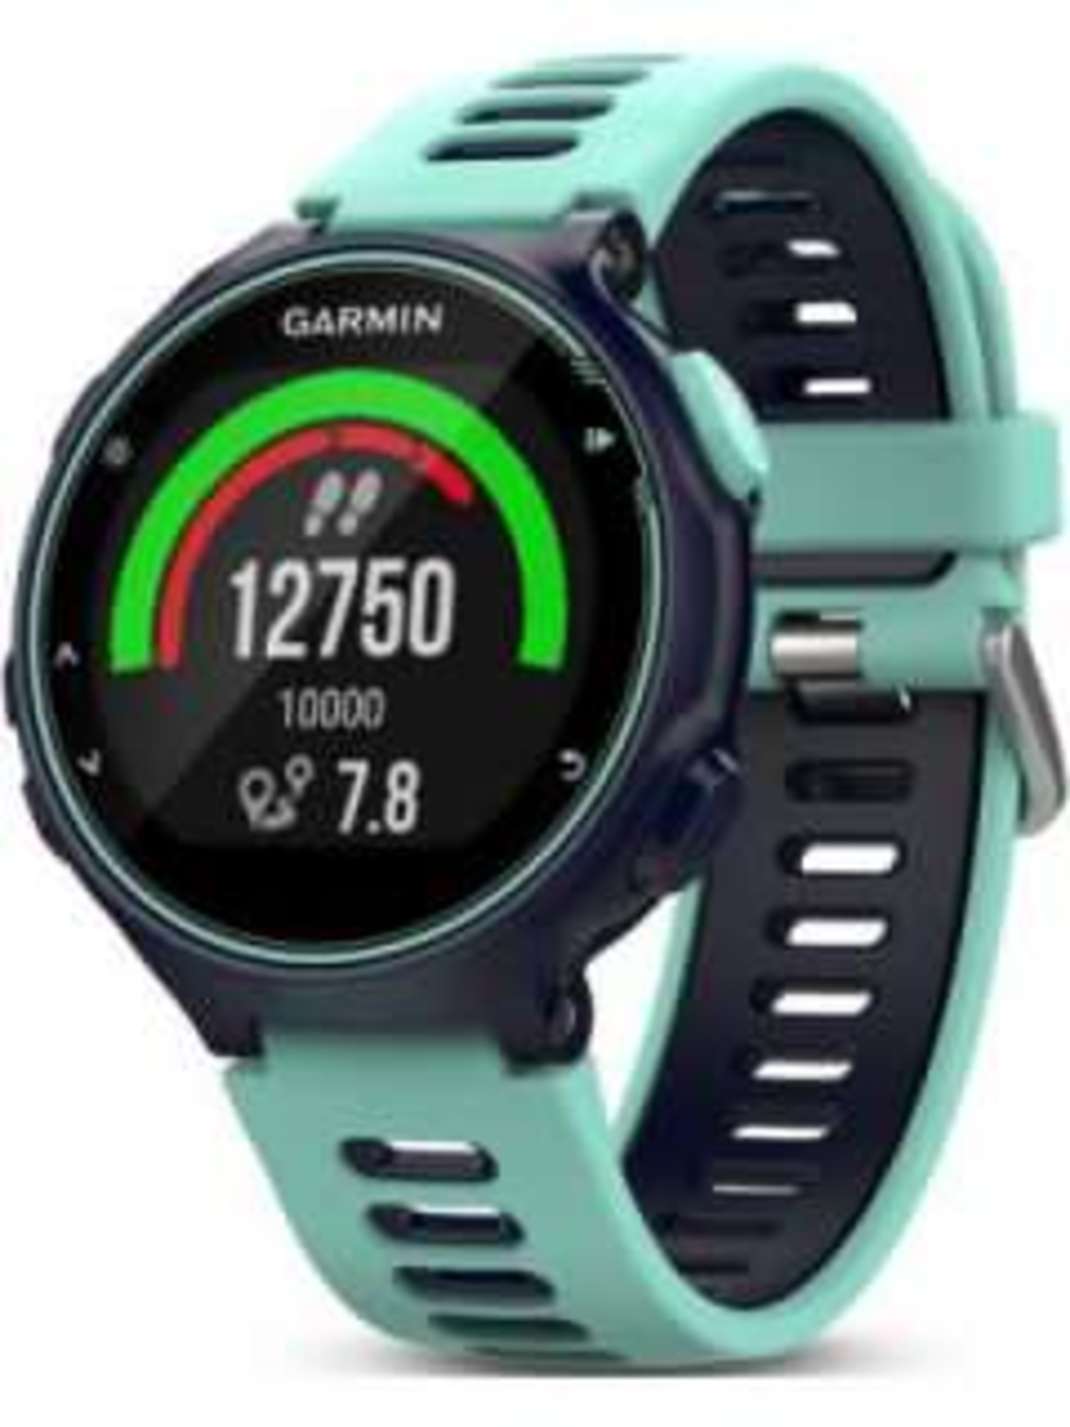 Compare Garmin Forerunner vs Garmin Forerunner 935 Garmin Forerunner 735XT vs Garmin Forerunner 935 Comparison by Specifications, Reviews &amp; Features | Gadgets